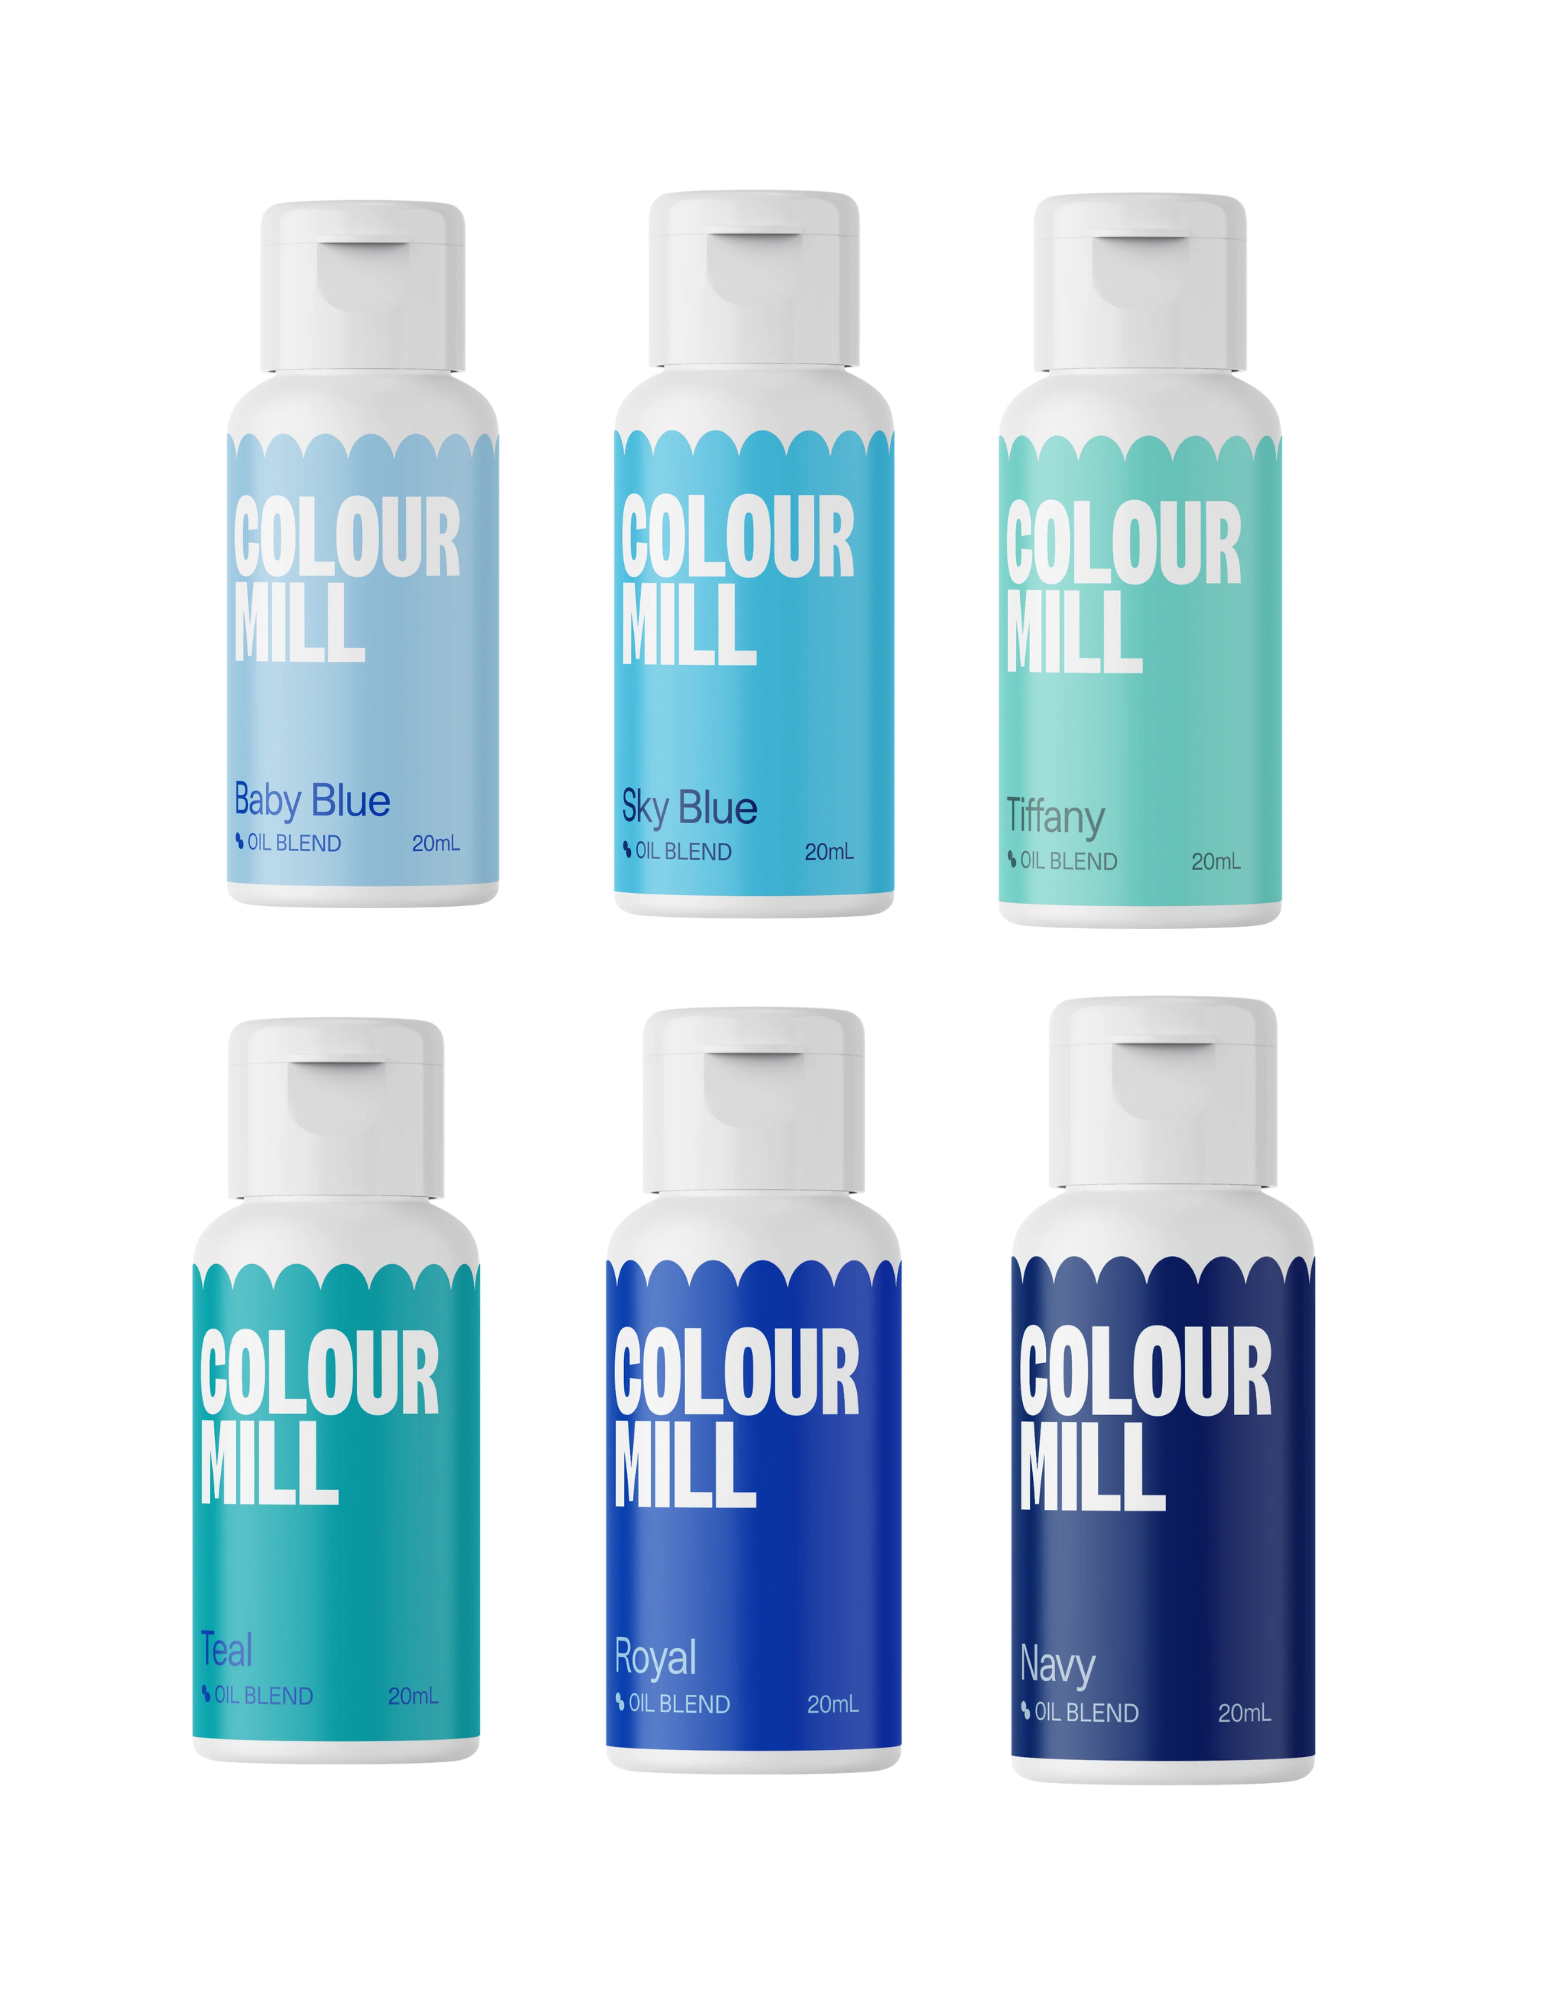 Colour Mill - Oil Blend Coloring - PRIMARY COMBO PACK - 100ml - 6